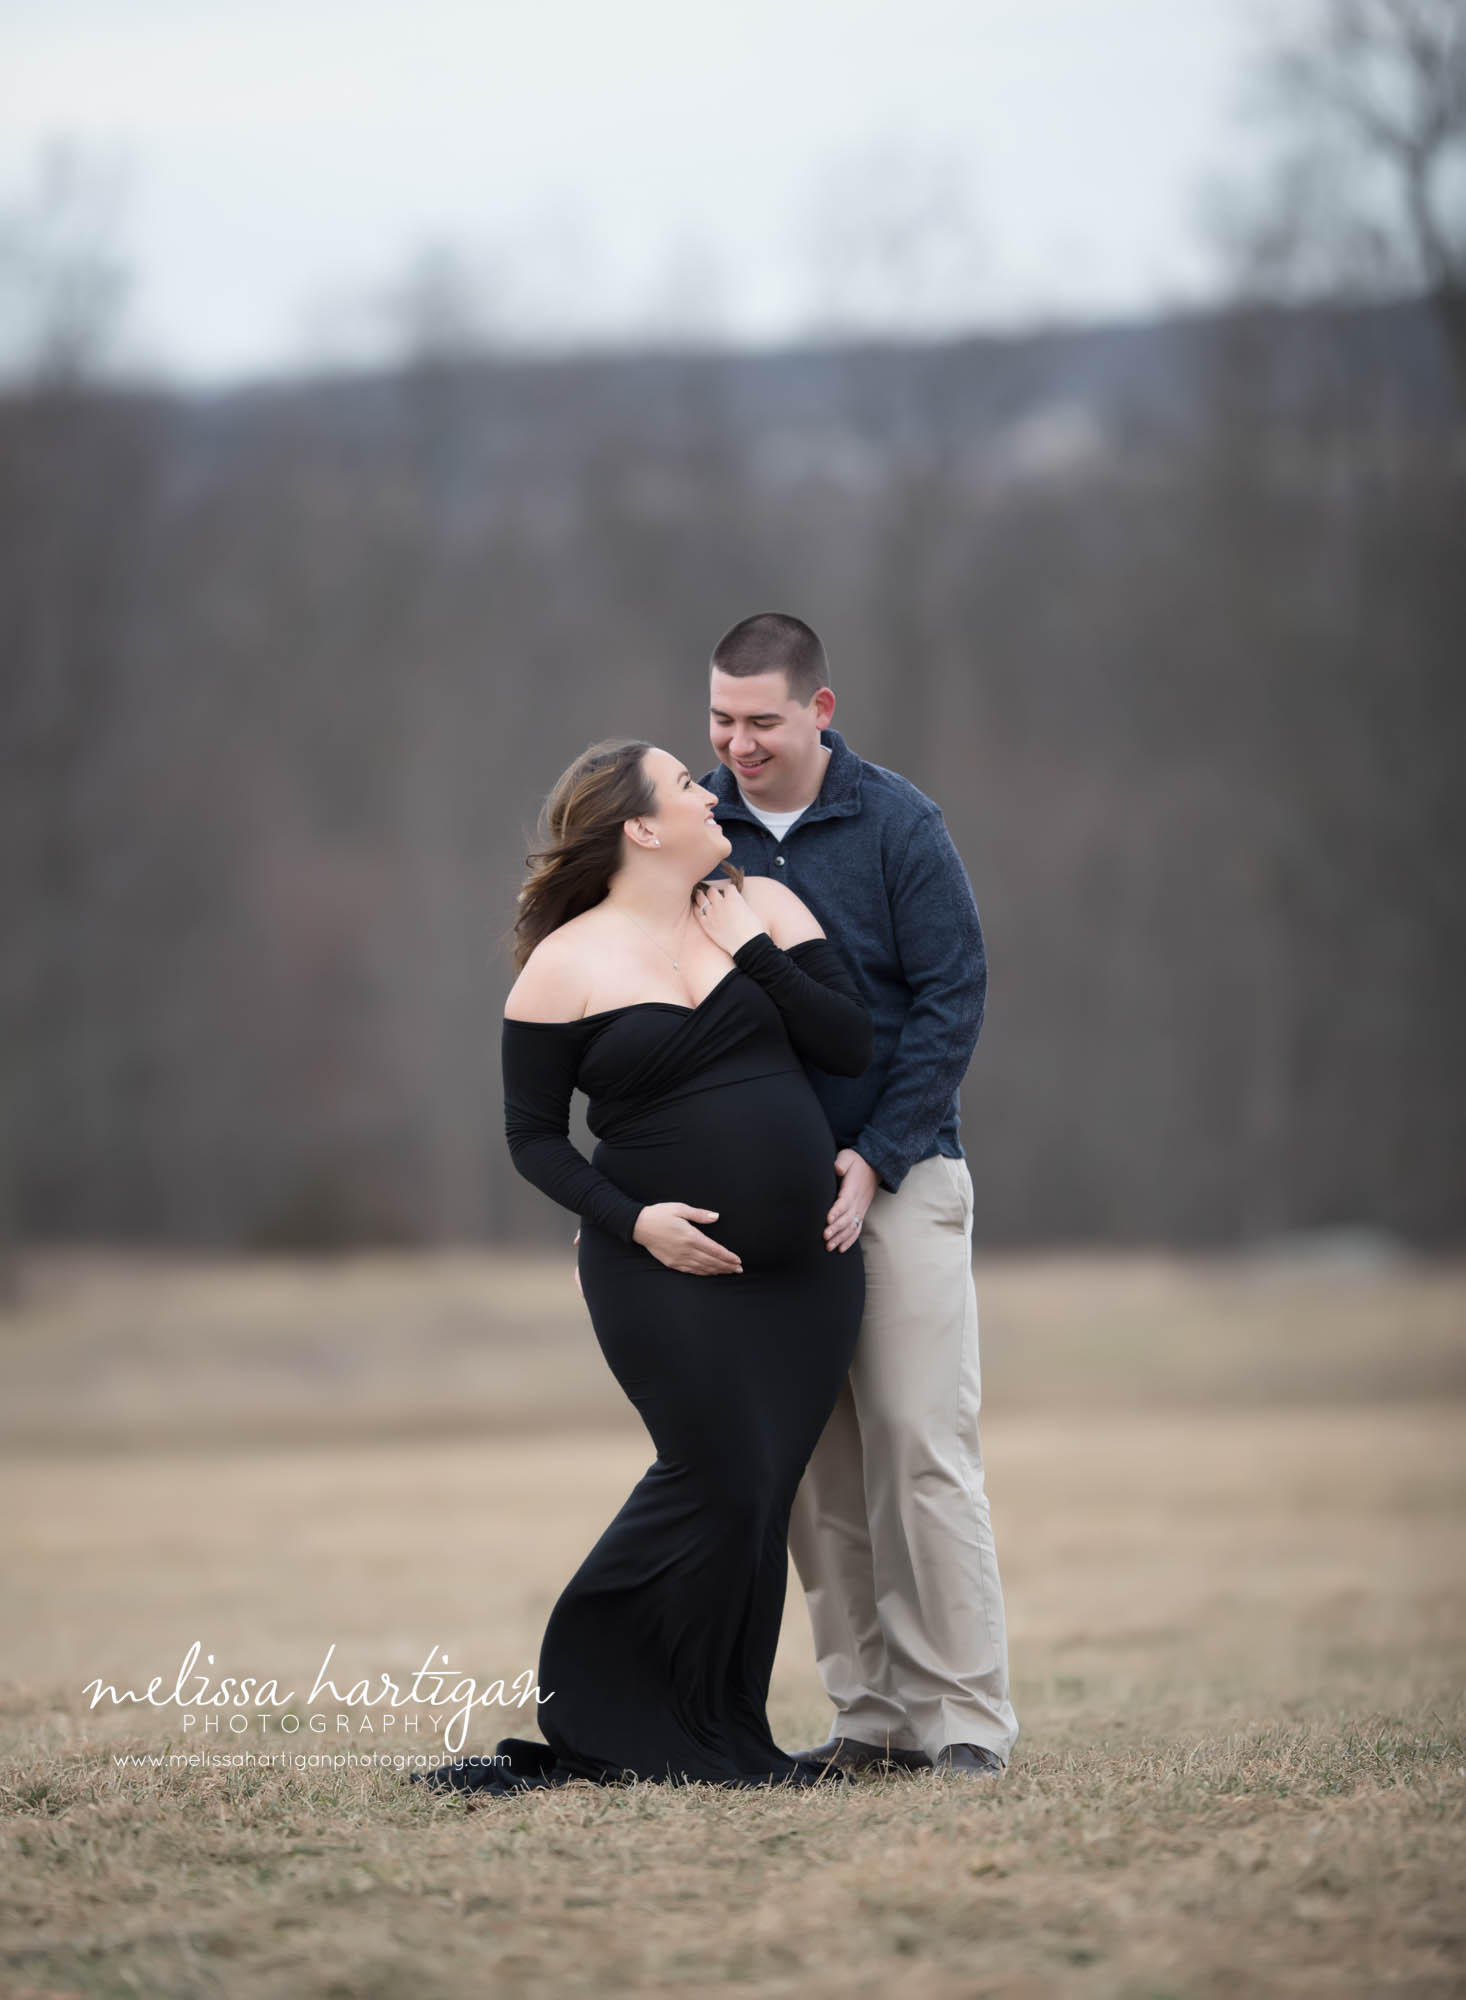 couples maternity photos standing poses with moms hands and dads hands on belly winter maternity pictures with no snow